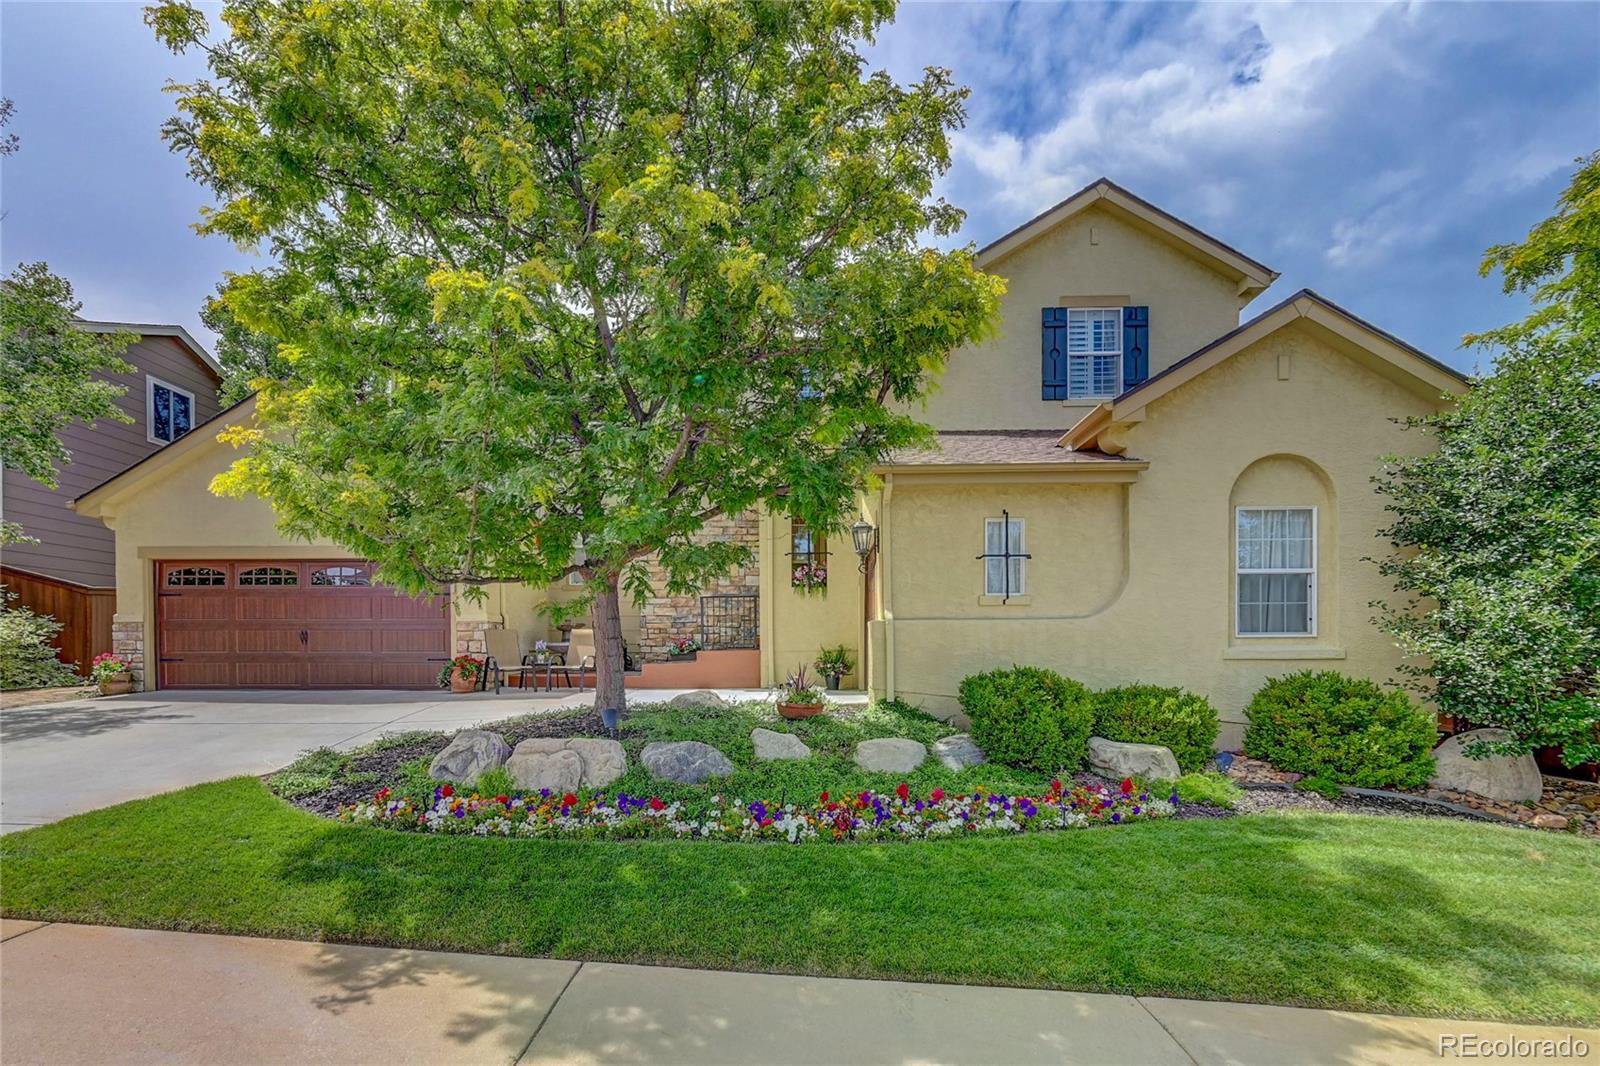 10271  Greatwood Pointe , highlands ranch MLS: 1680512 Beds: 4 Baths: 4 Price: $925,000